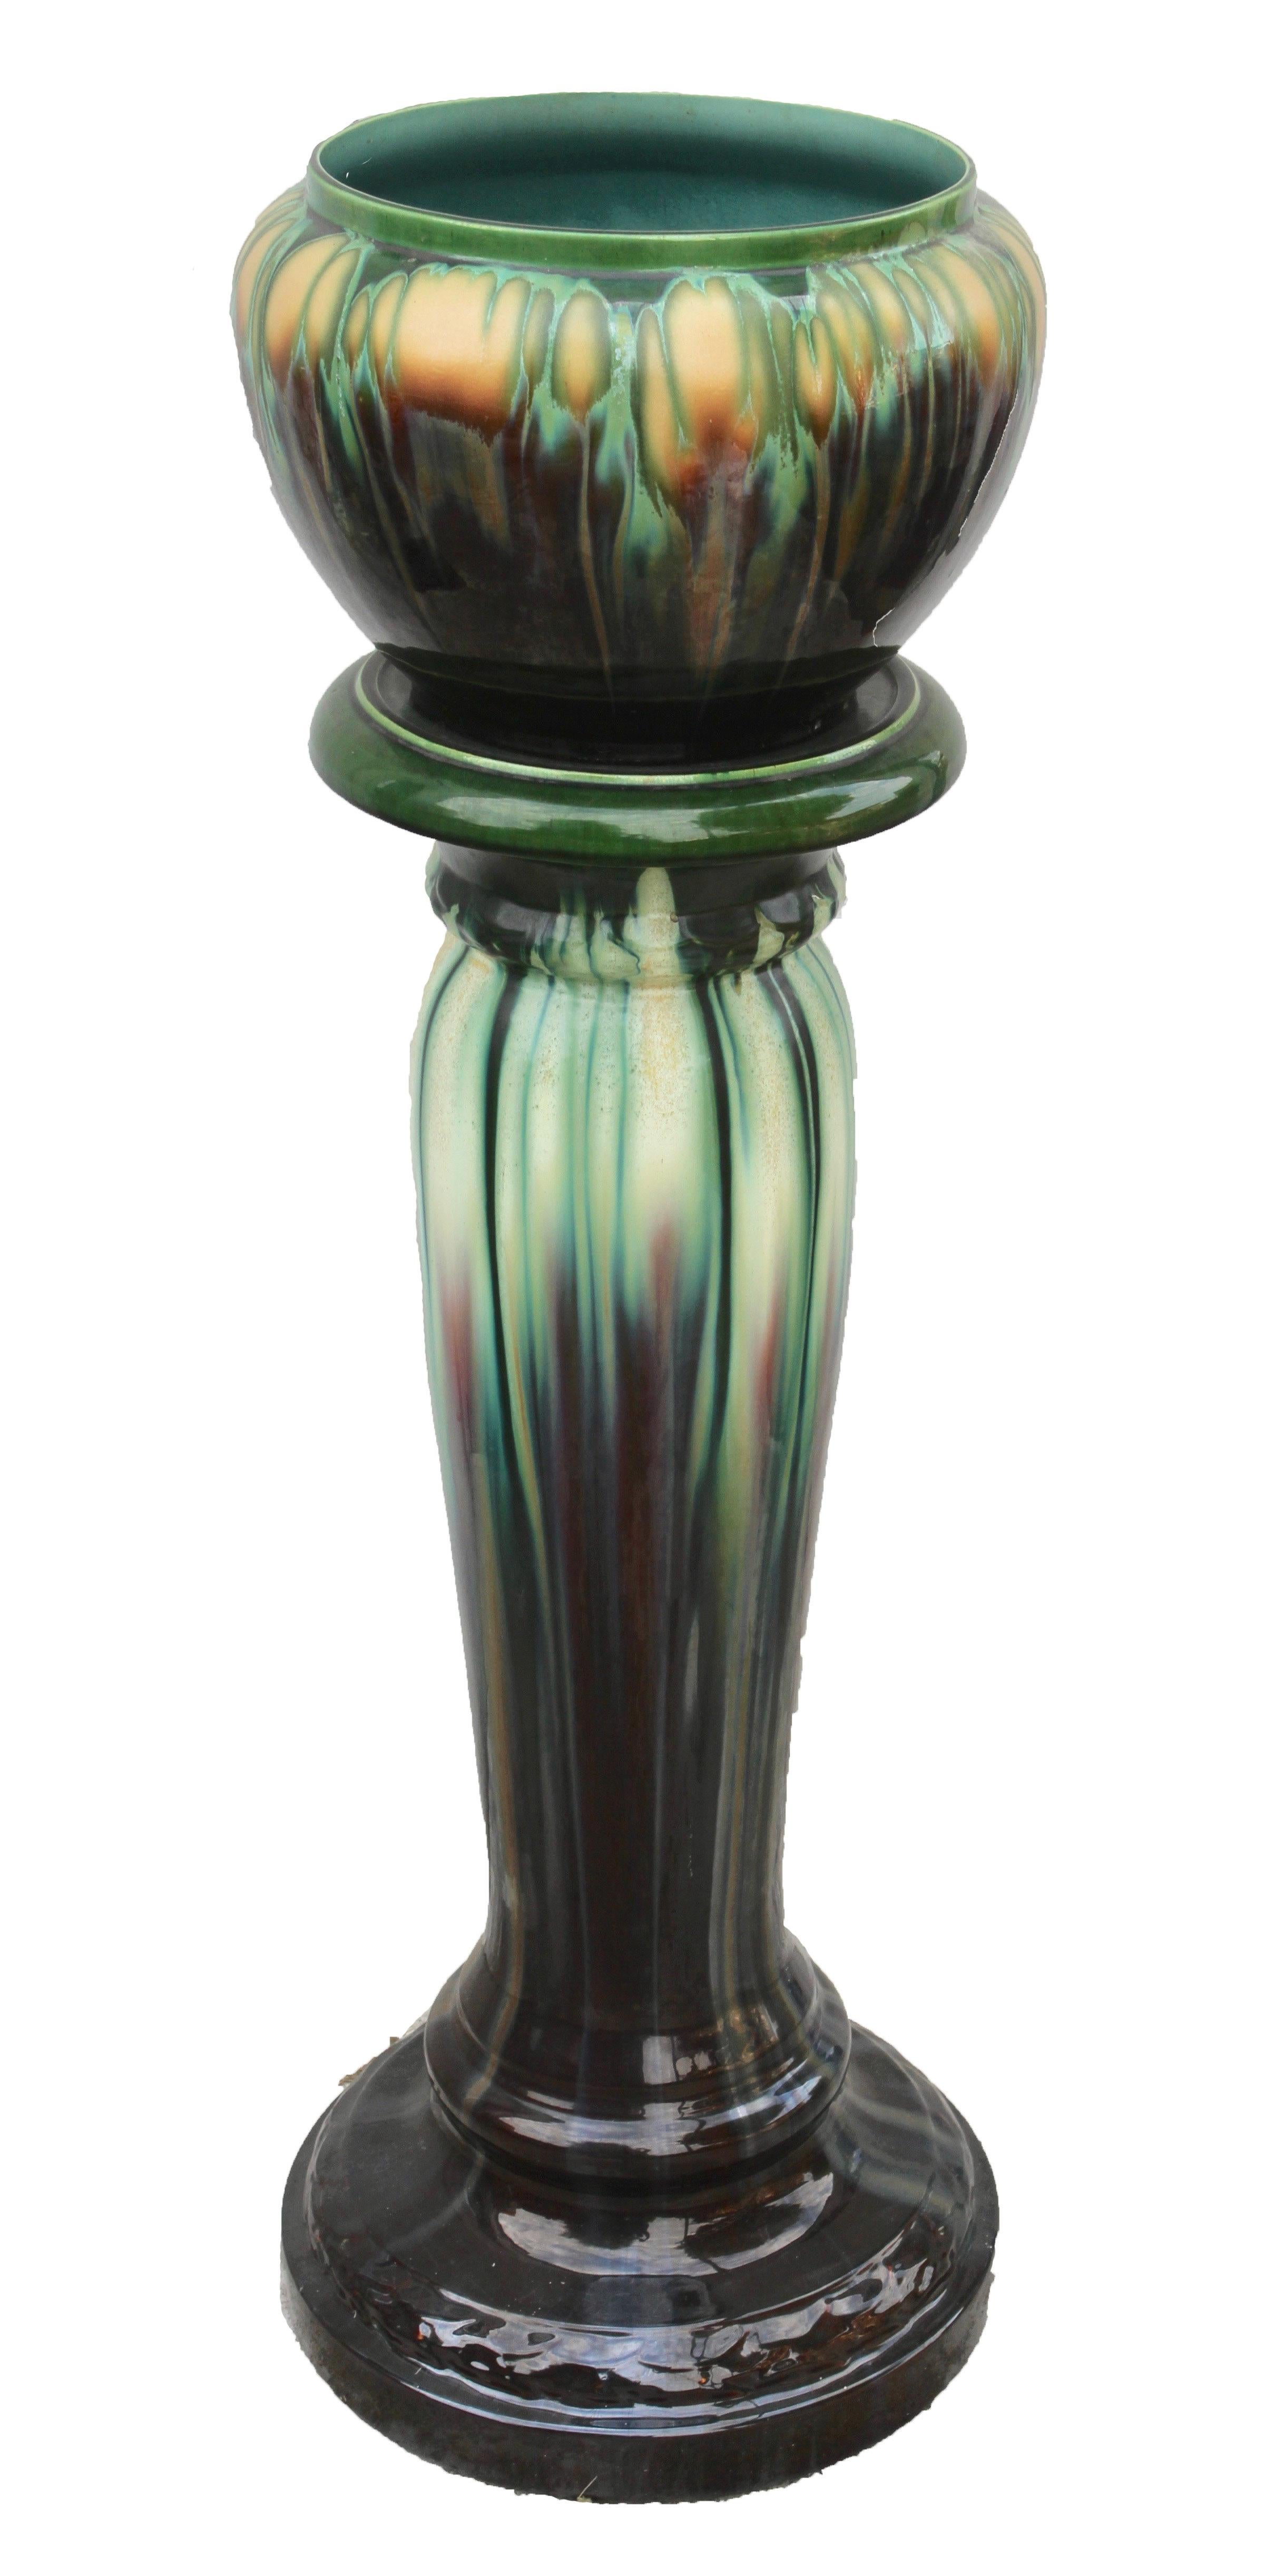 3x Art Nouveau large ceramic jardinière on stand, 1900s.

 magnificent glazed earthenware column and planter from the art nouveau period circa 1900s

The pieces are in excellent condition and a real beauty!
A real treasure for the ceramics'